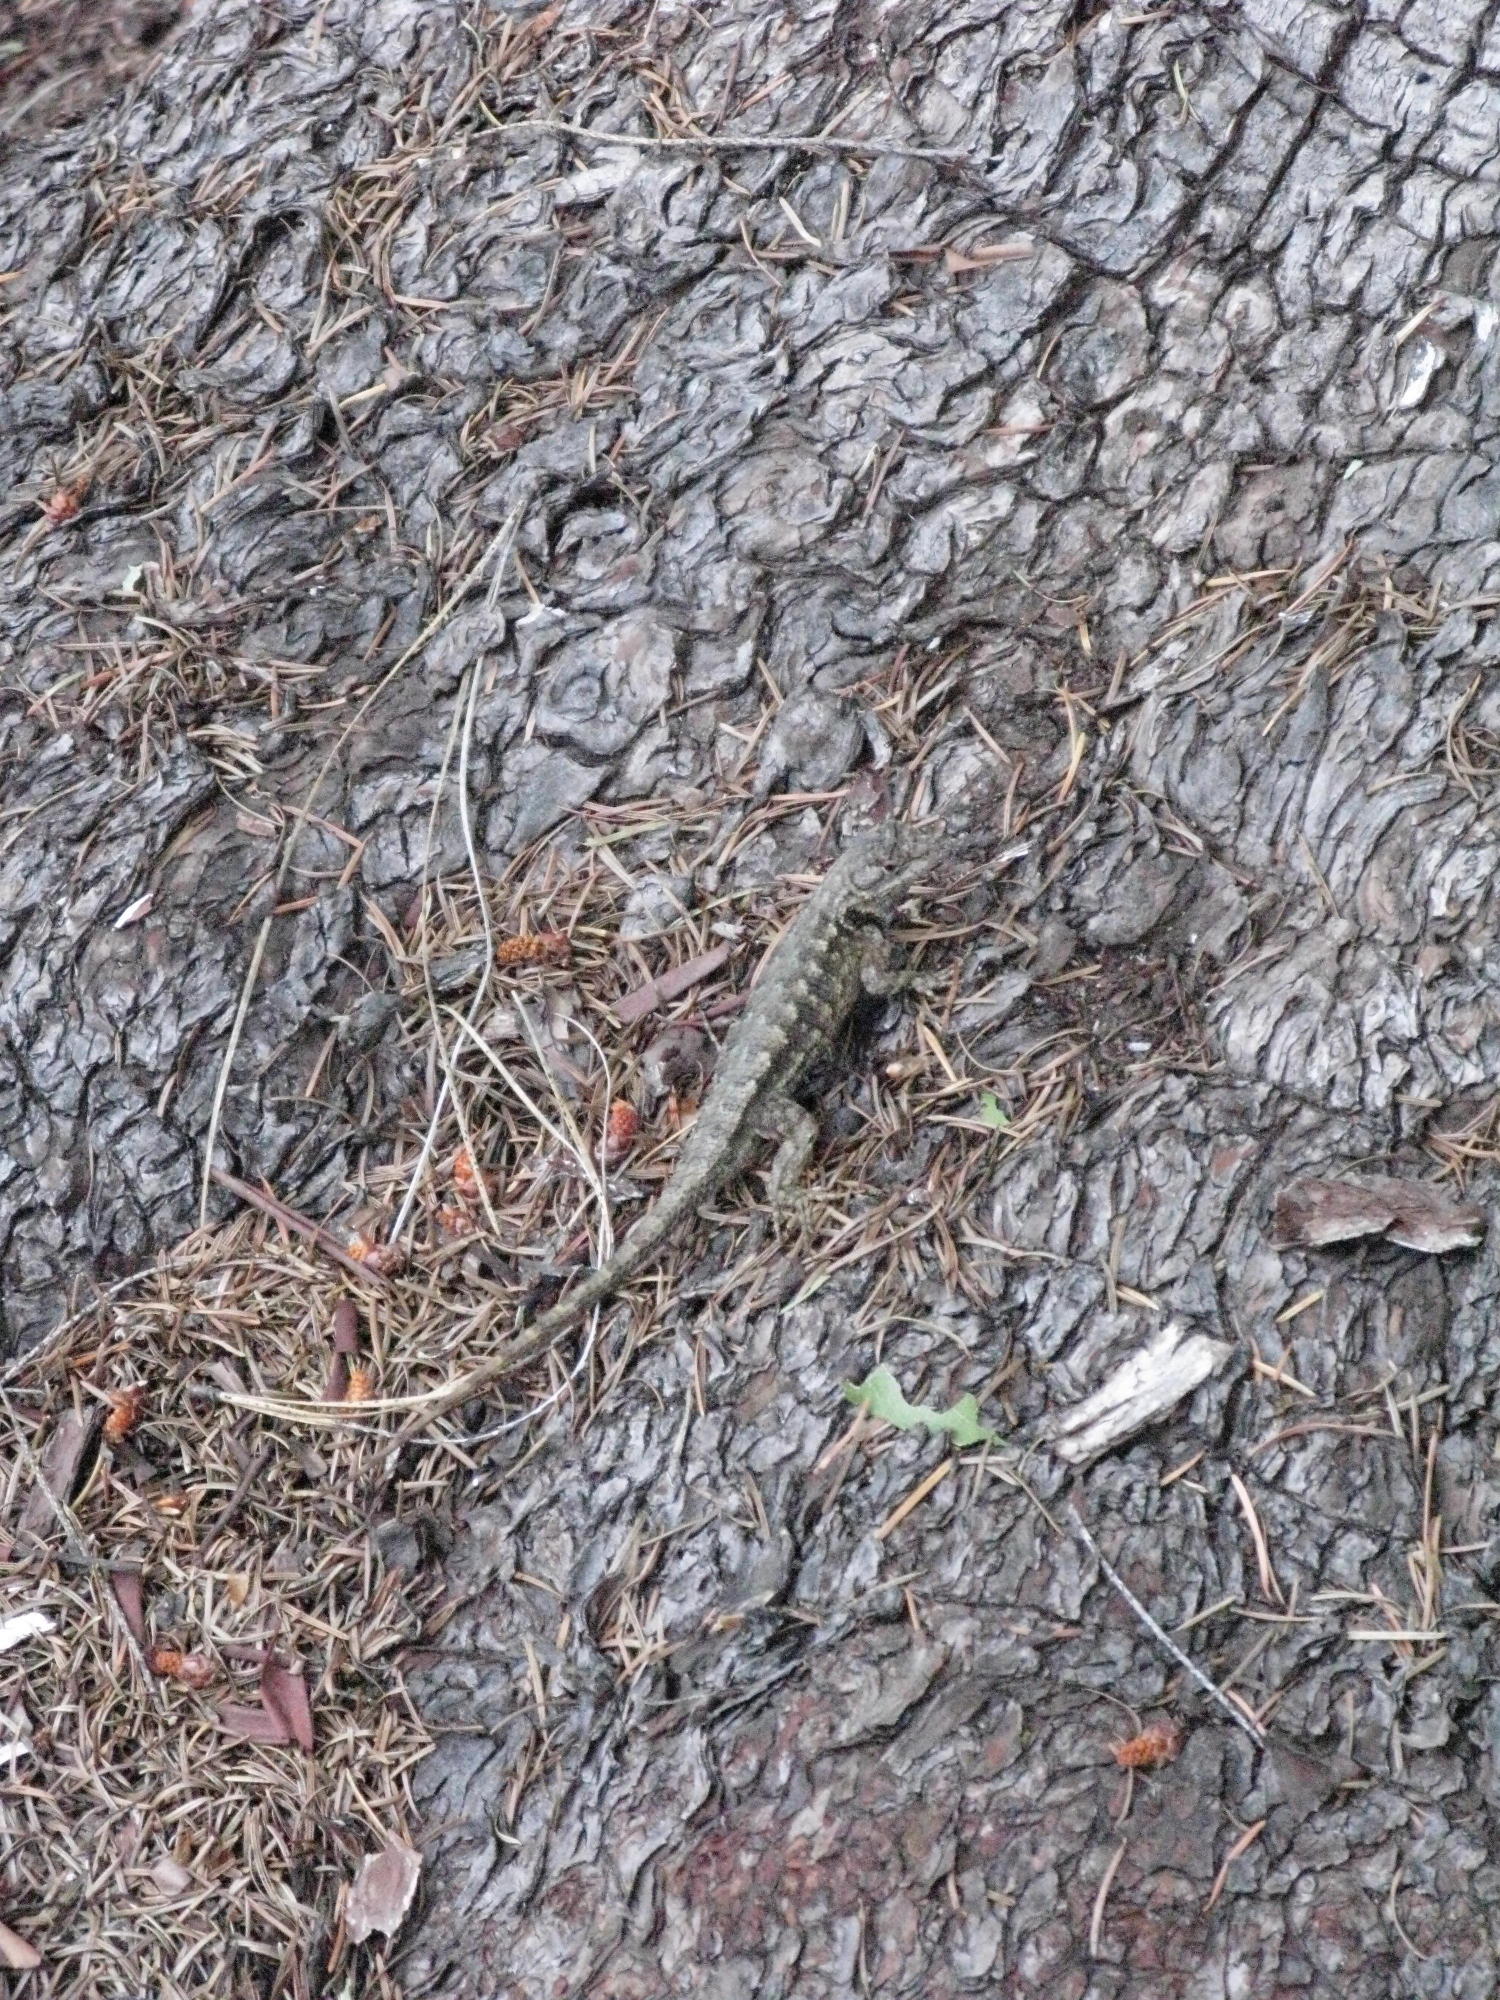 Camouflaged Lizard on Trail to the Eel River, Covelo Yoga and Healing Festival